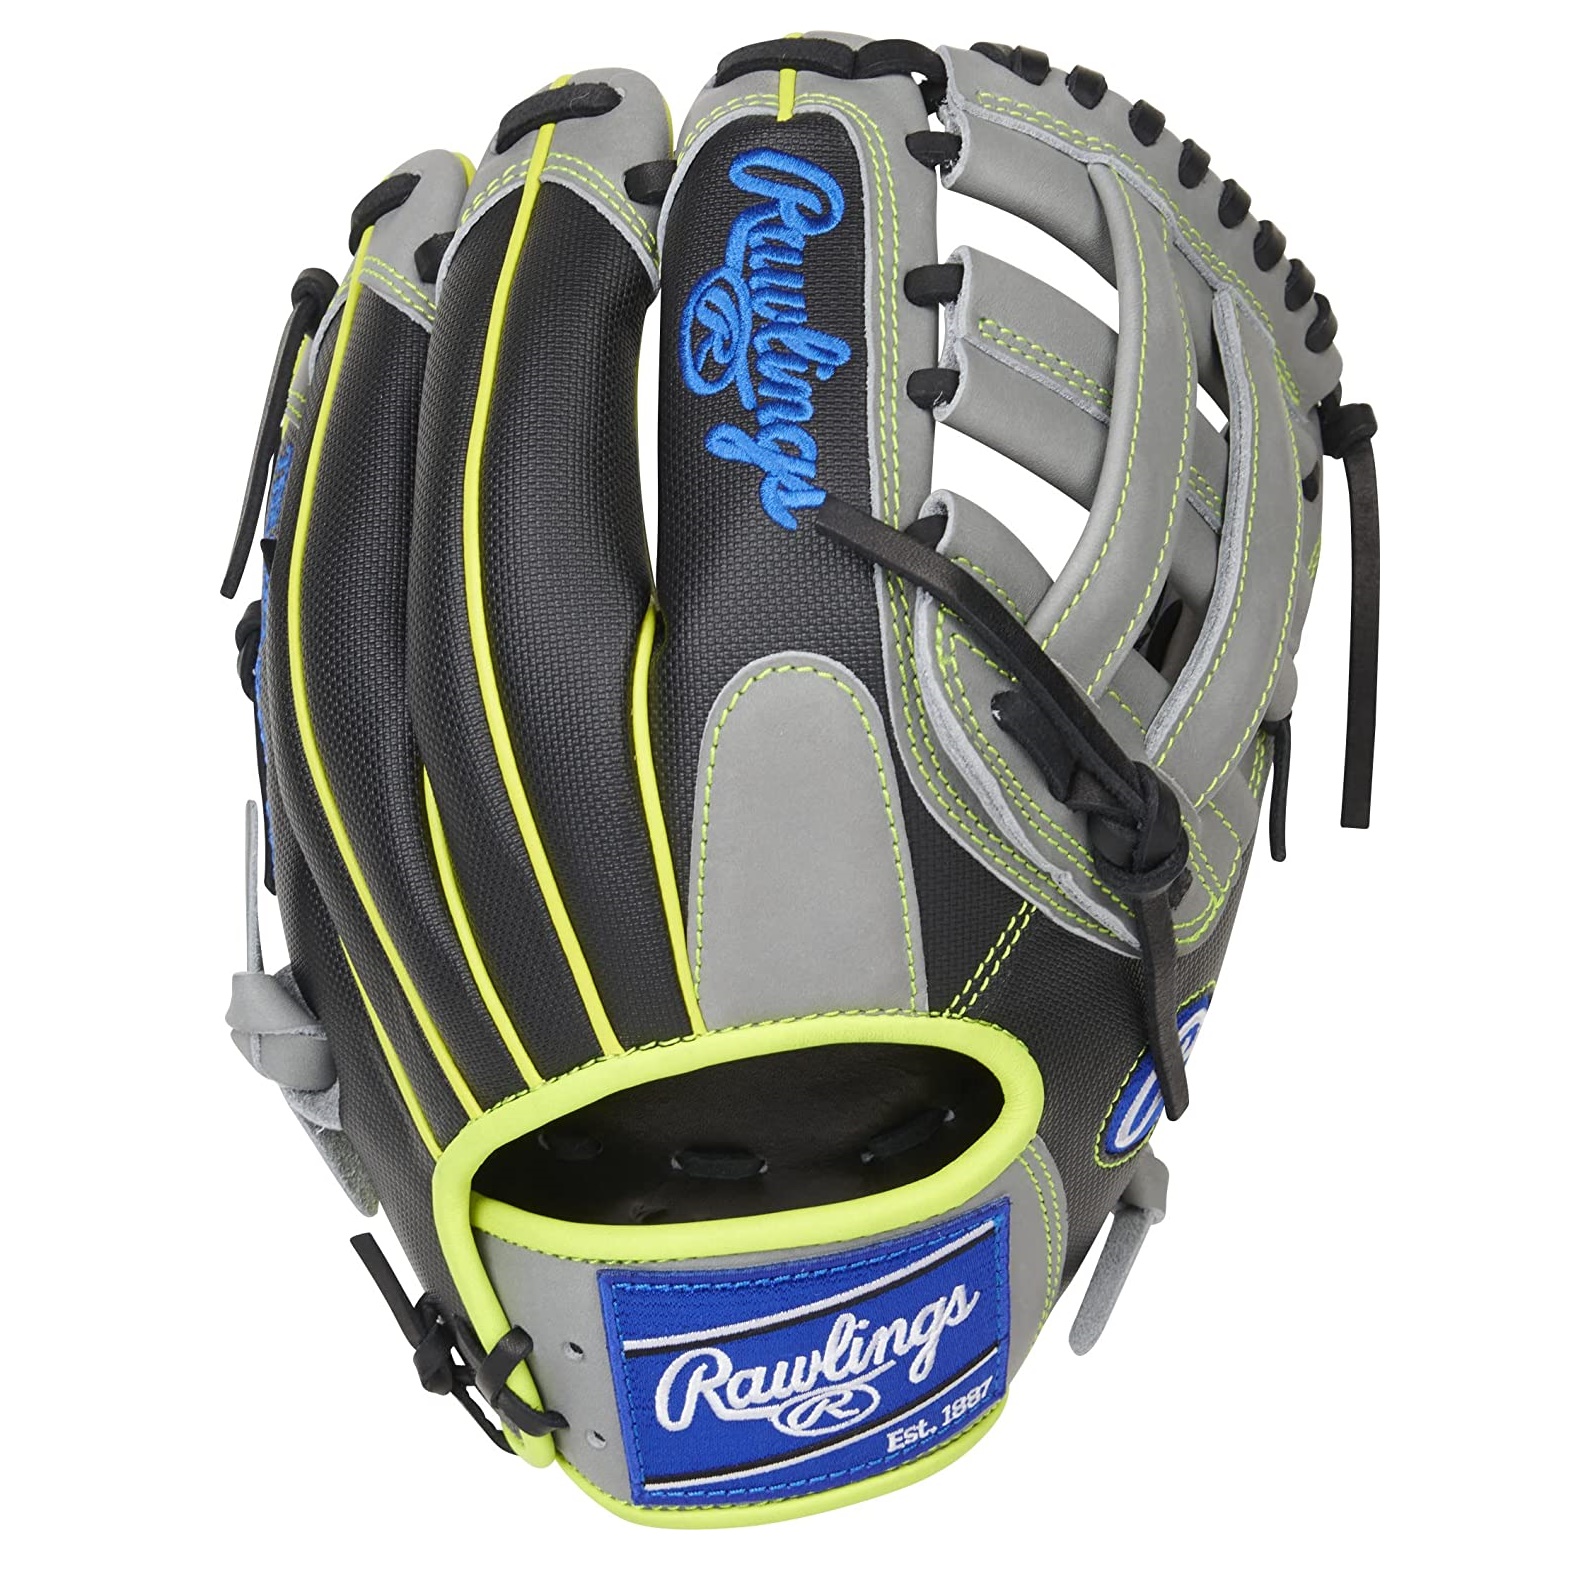 rawlings-heart-of-the-hide-baseball-glove-11-75-inch-pro-h-web-right-hand-throw PRO205-6GRSS-RightHandThrow Rawlings  The Rawlings PRO205-6GRSS 11.75 inch glove is designed for infield players